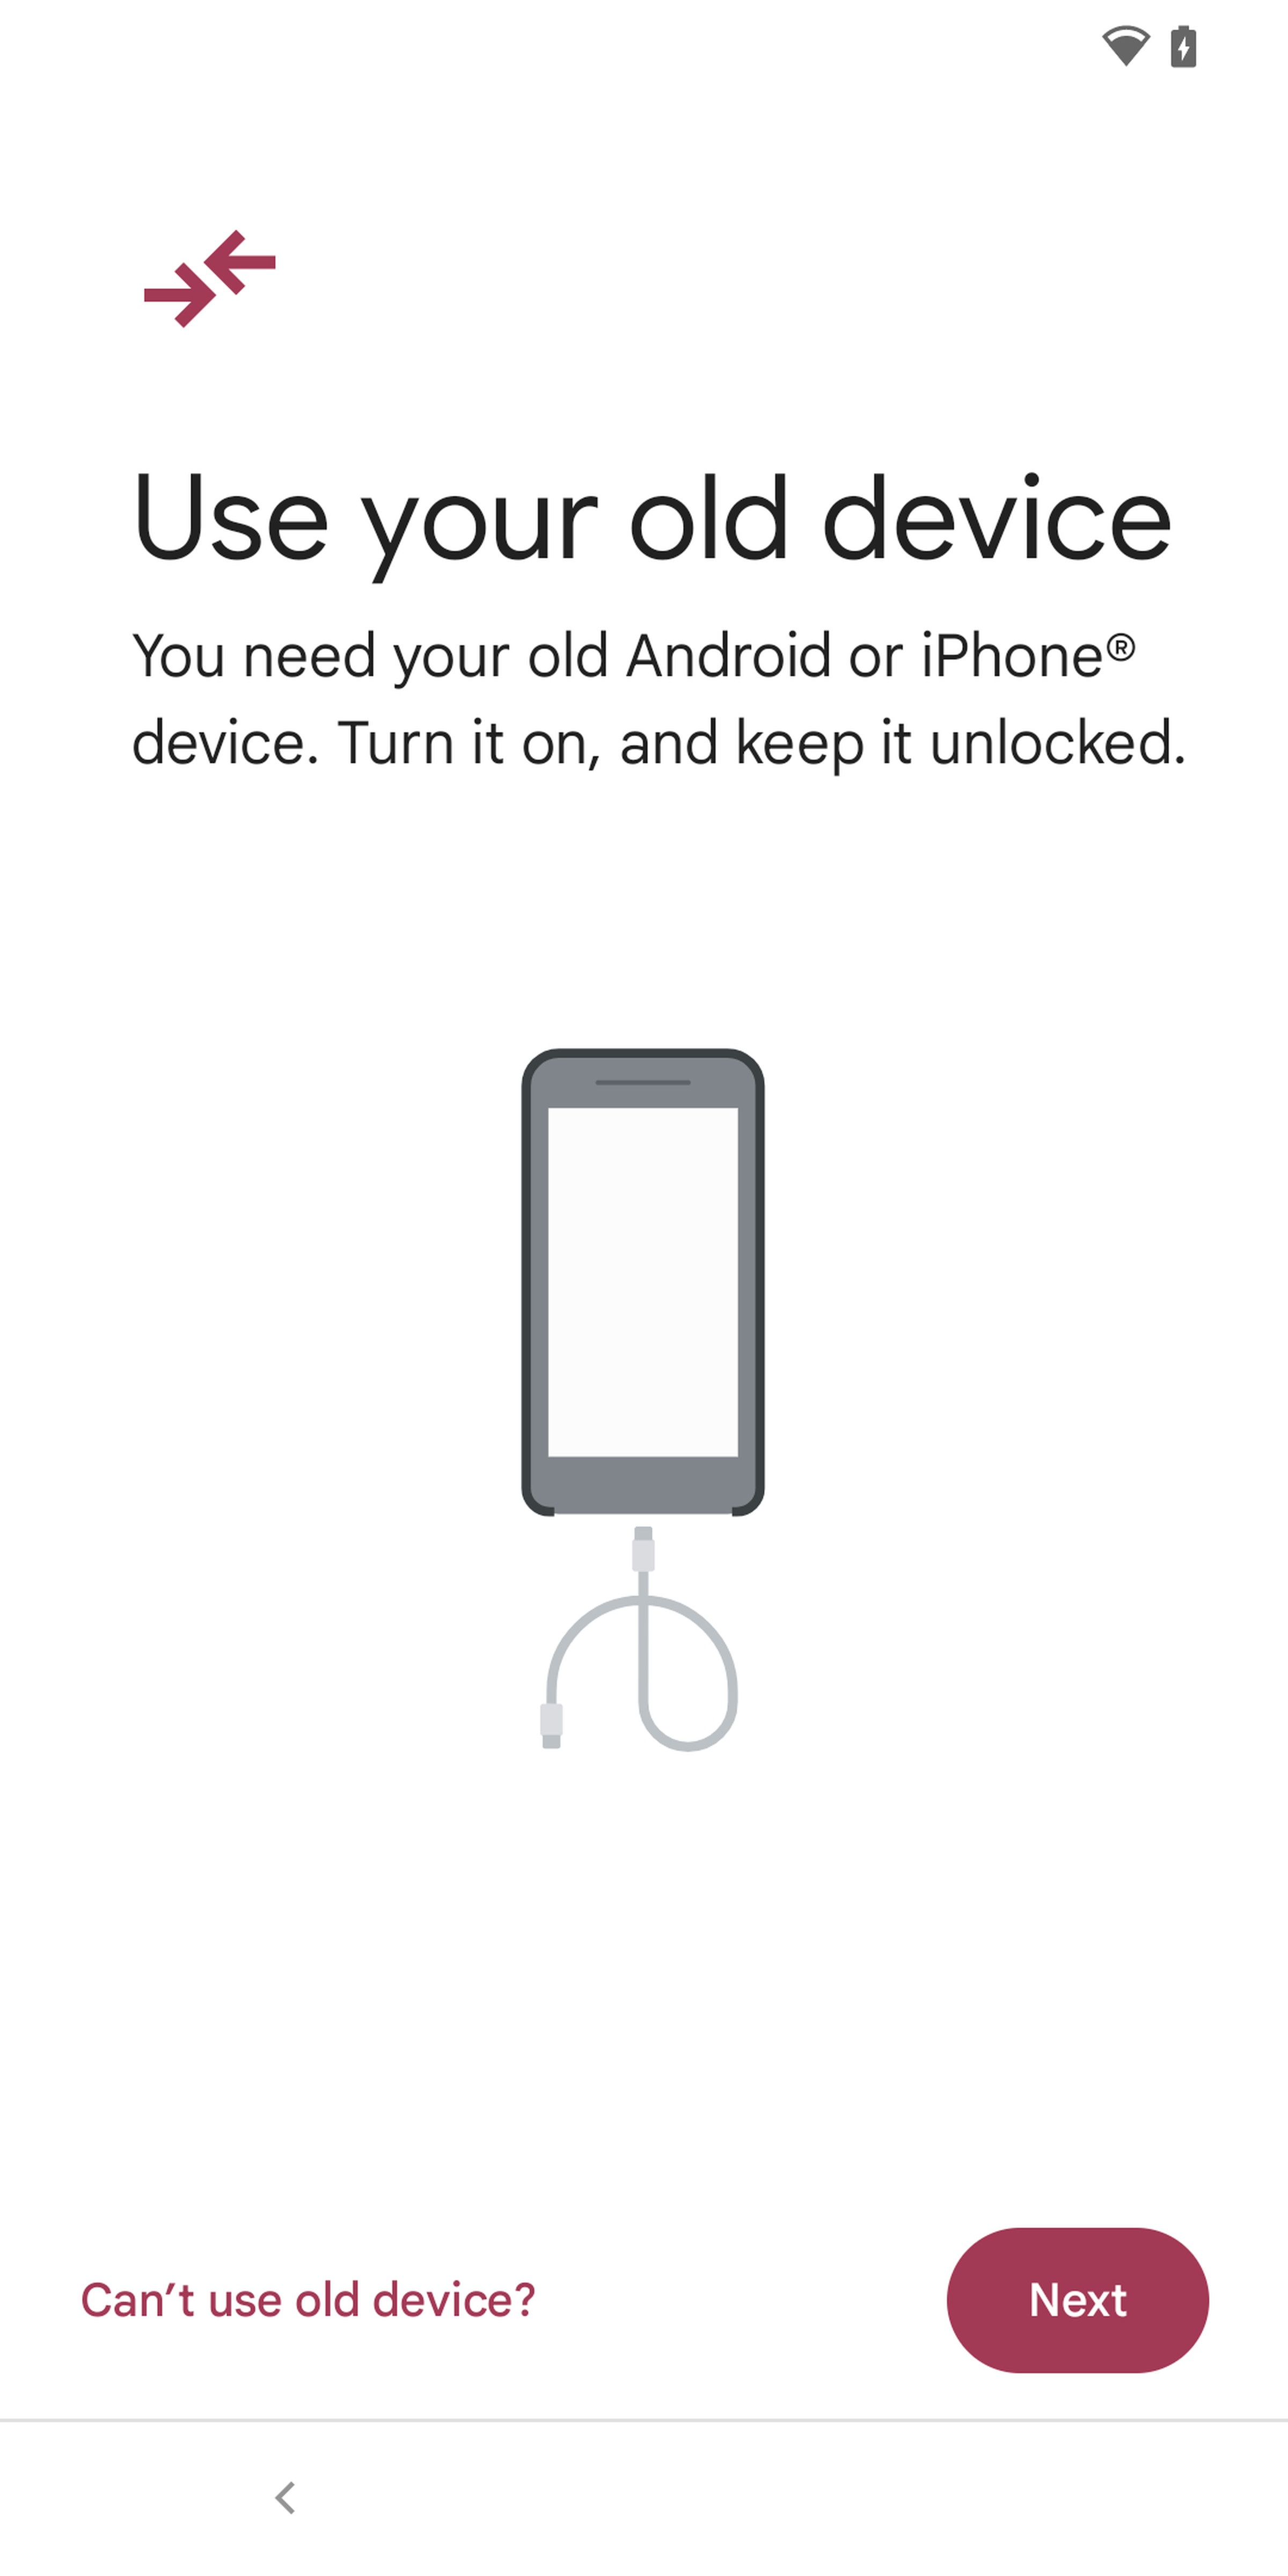 Page: Use your own device